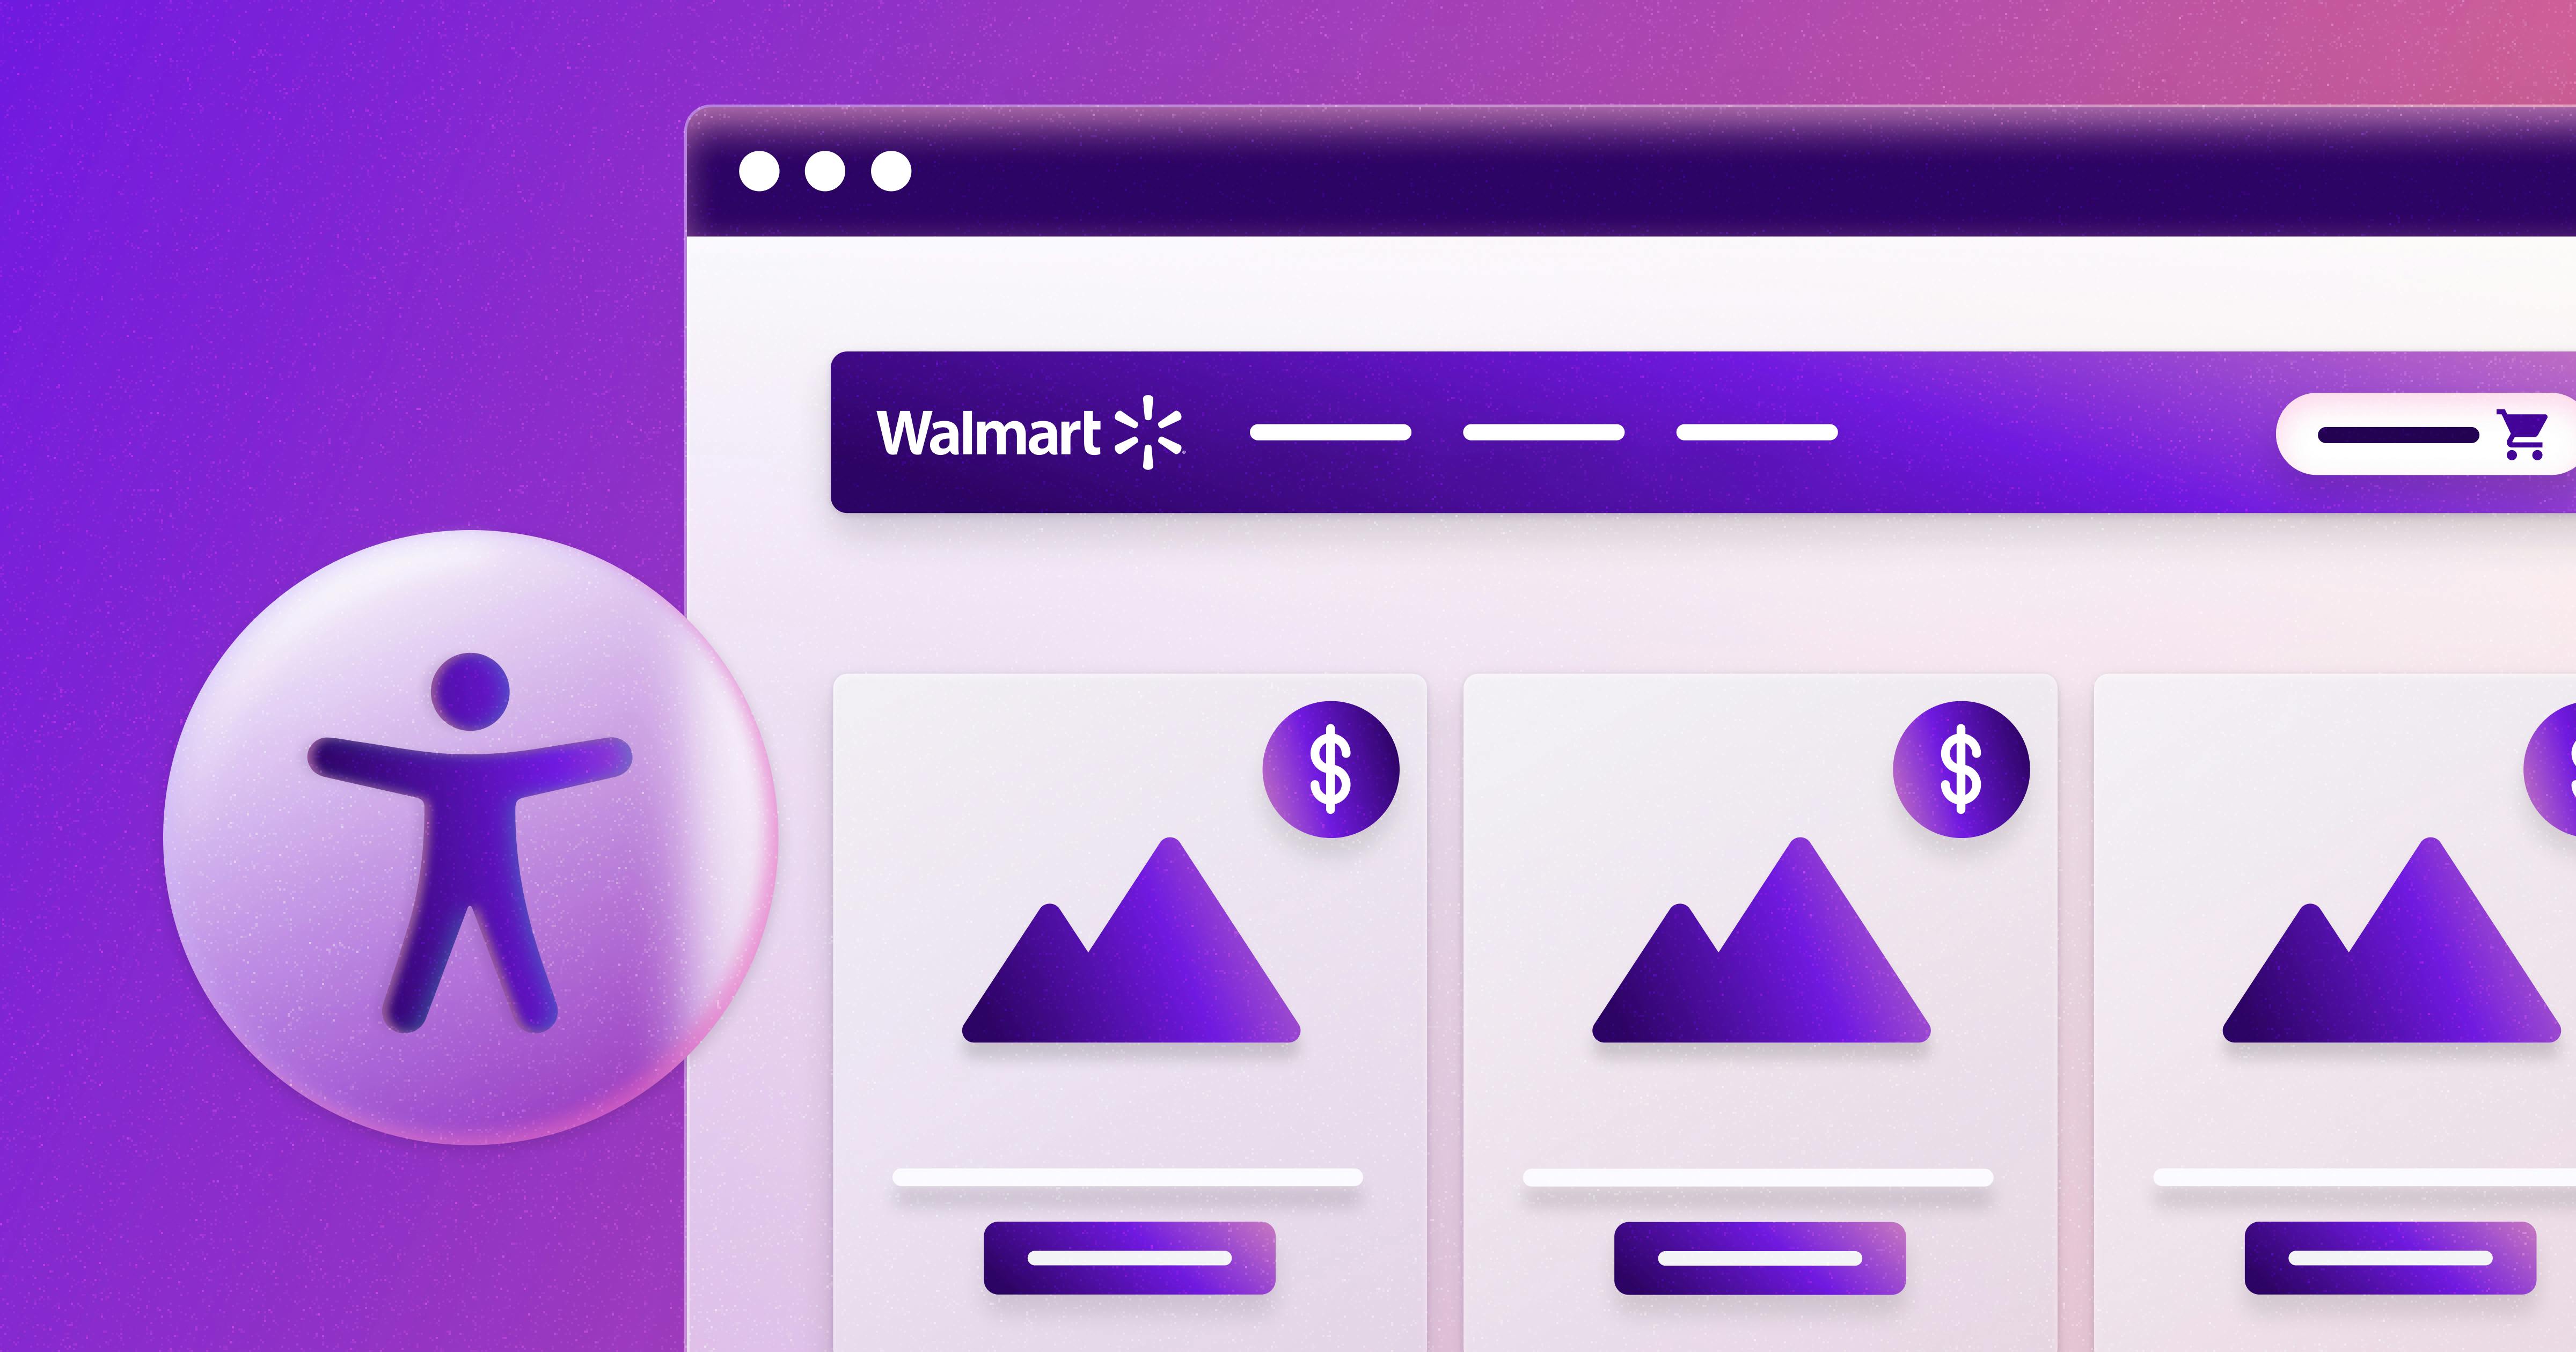 A stylized version of Walmart's website that shows different product cards, next to an accessibility symbol.